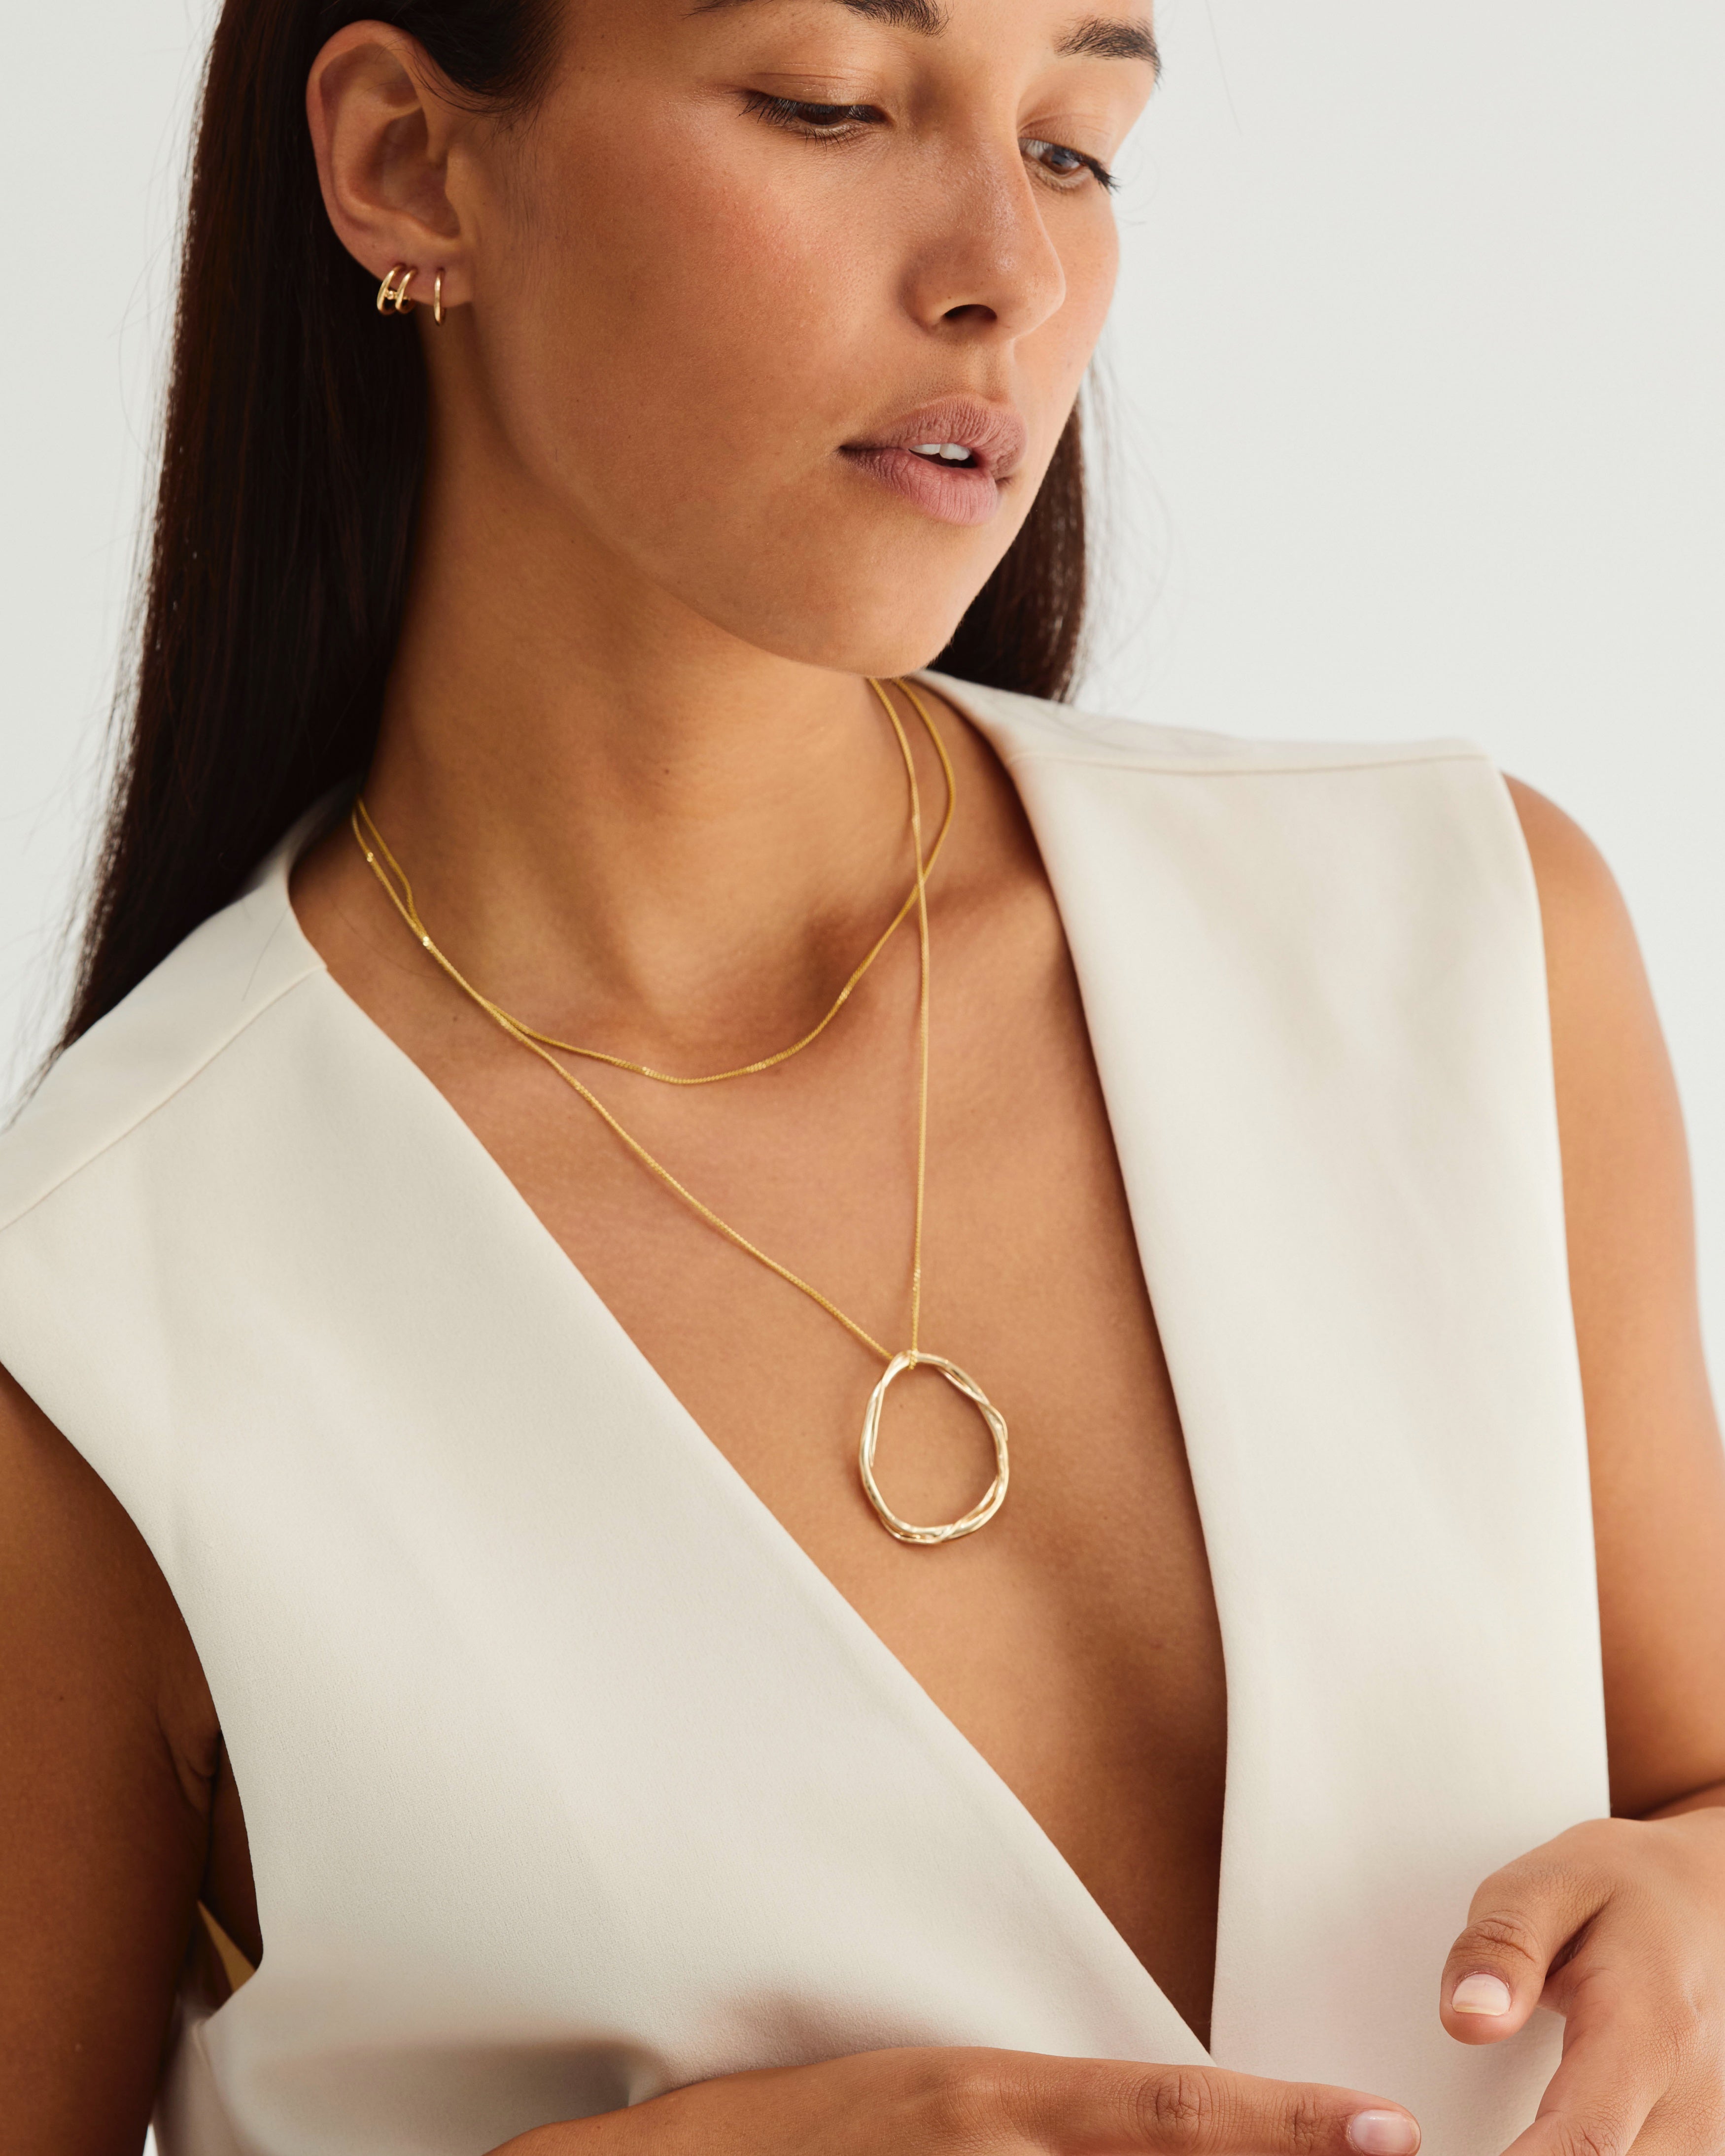 A woman wearing the Dalí Necklace in yellow gold.